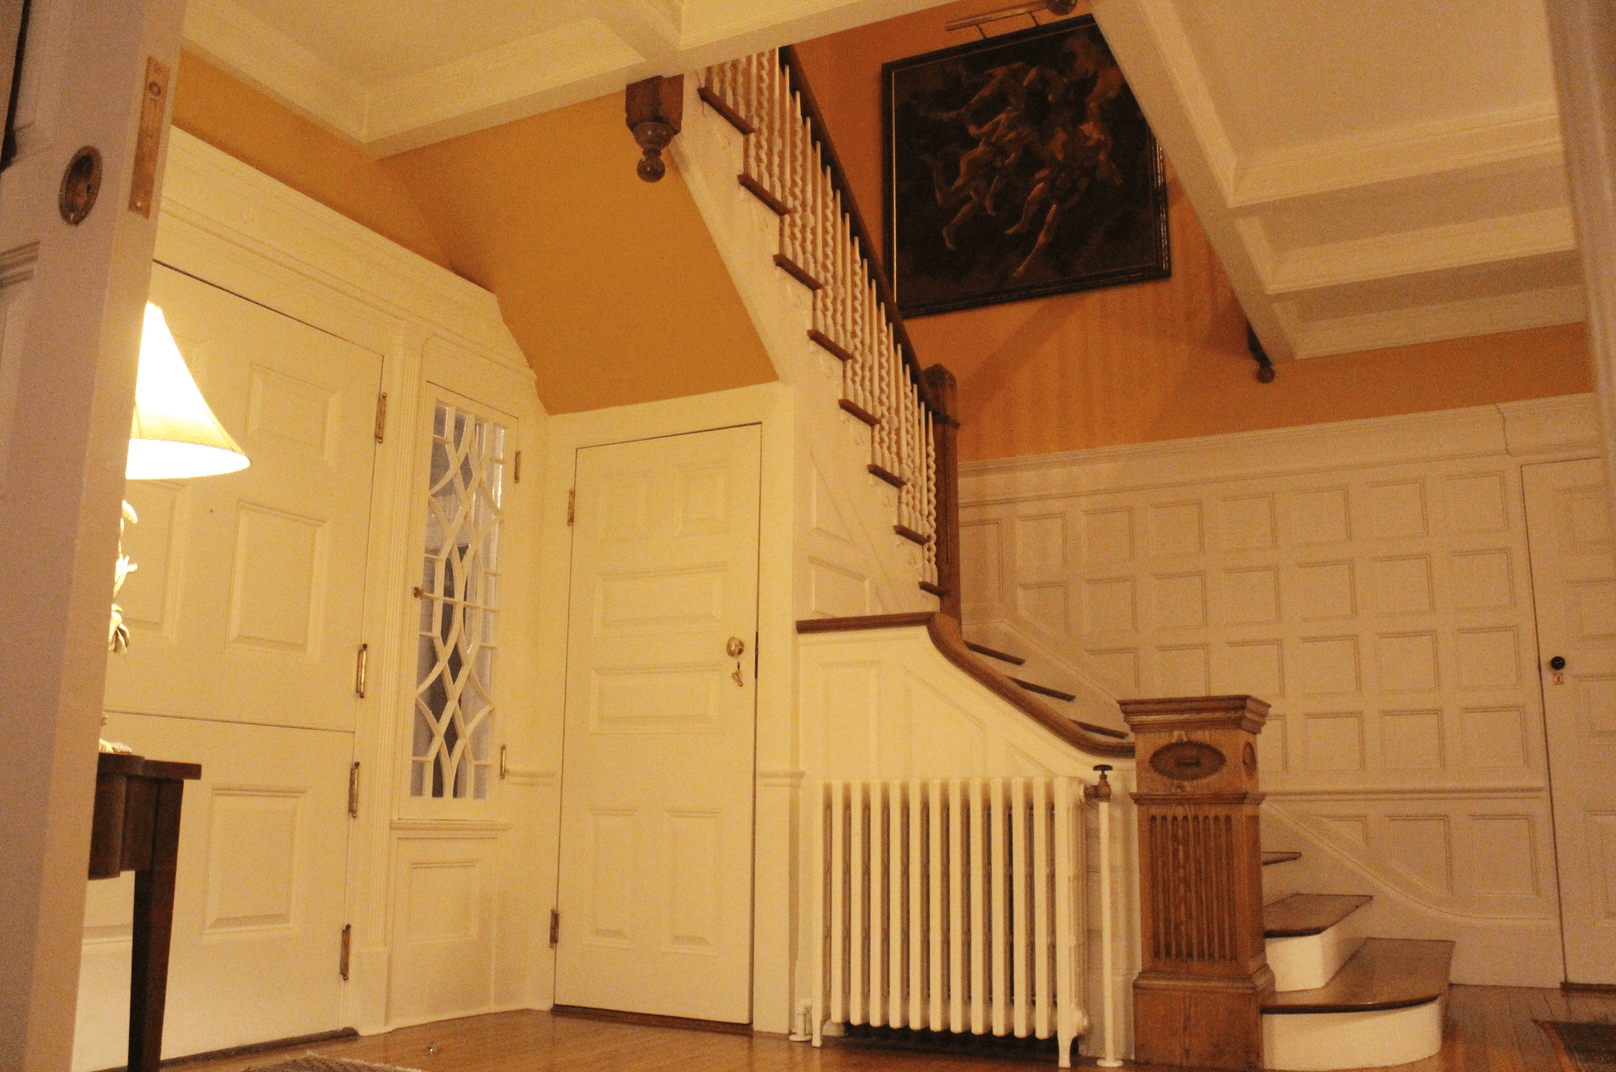 The entrance hall features raised paneling, a wide staircase, large newel post and corkscrew balusters. Most of the interior trim remains and is executed in flamboyant federal style, most notable in the fireplace mantles. Photo: Leslie Yager